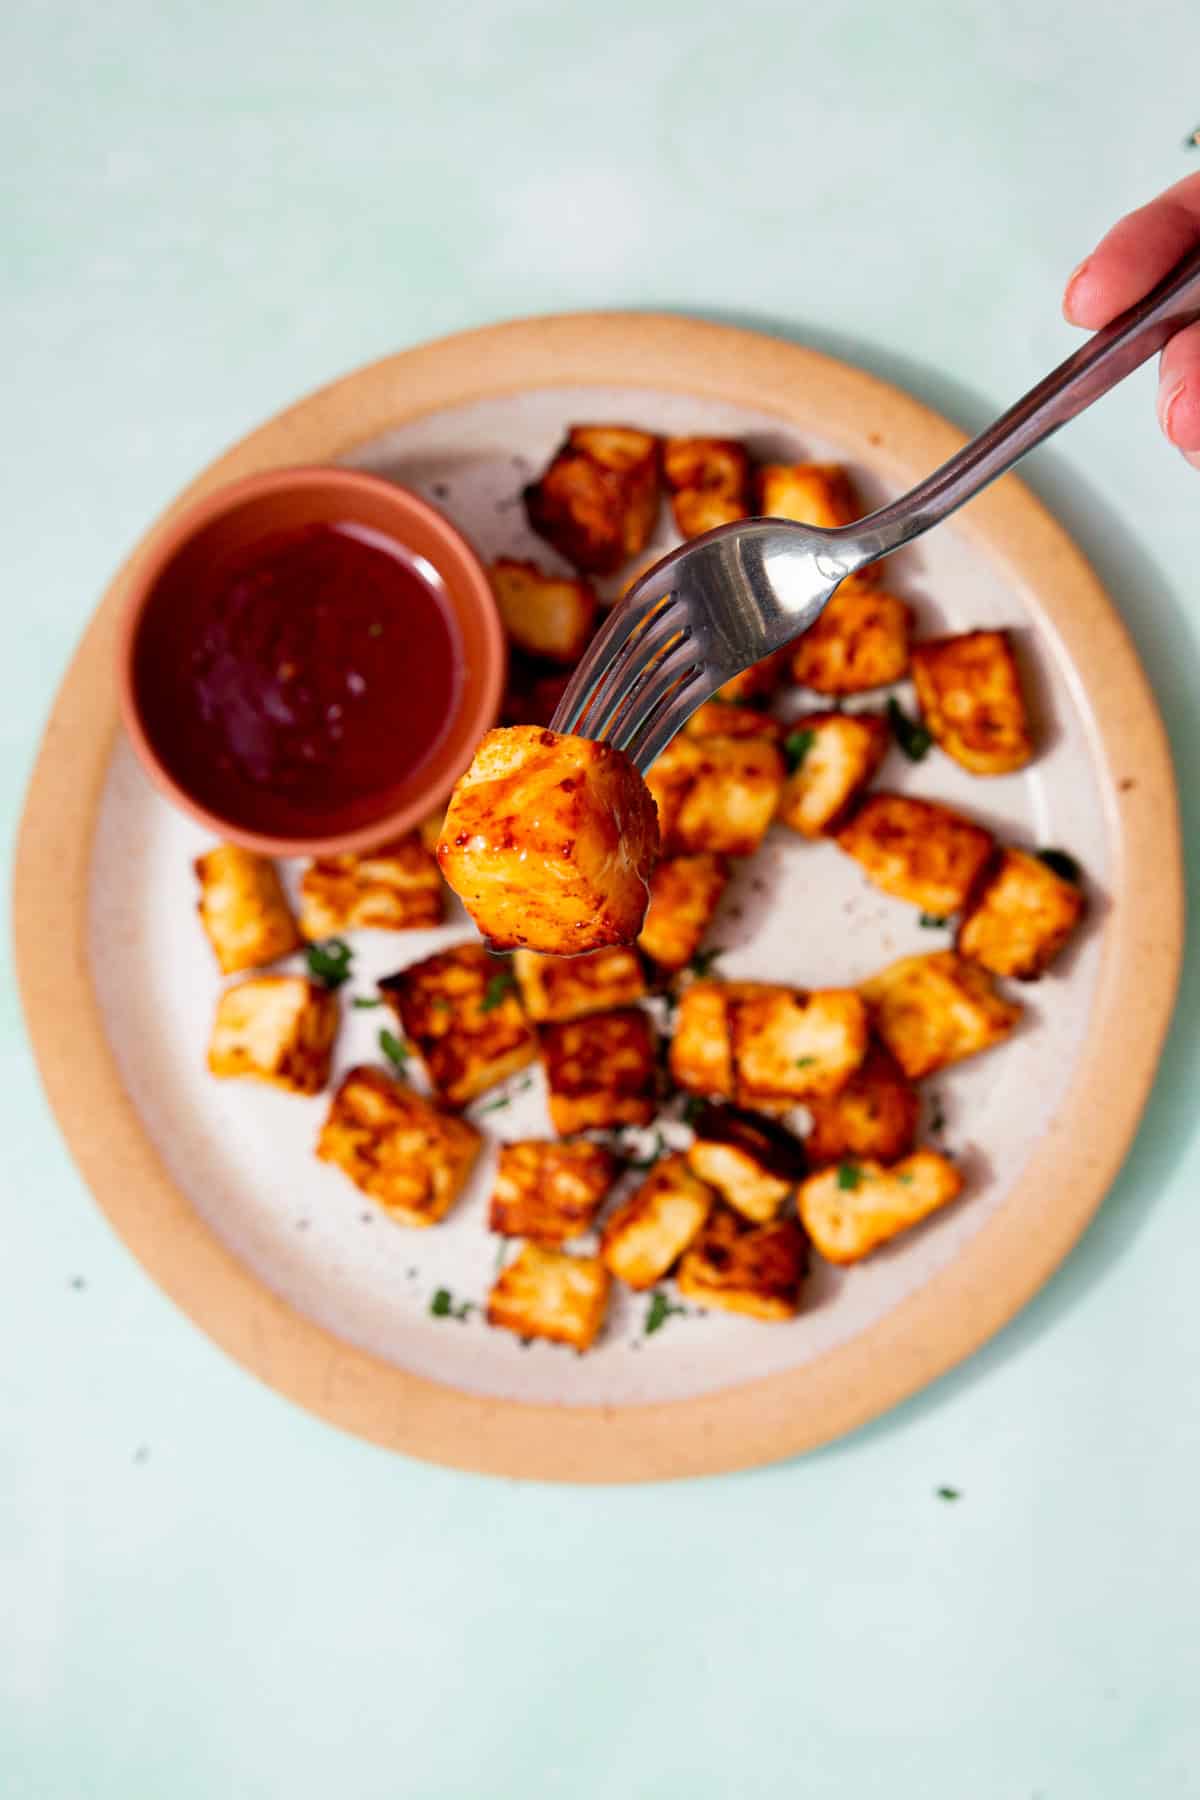 A plate filled with golden browned halloumi cubes with some green herbs and a small bowl of chilli sauce with a fork holding up a piece of halloumi.